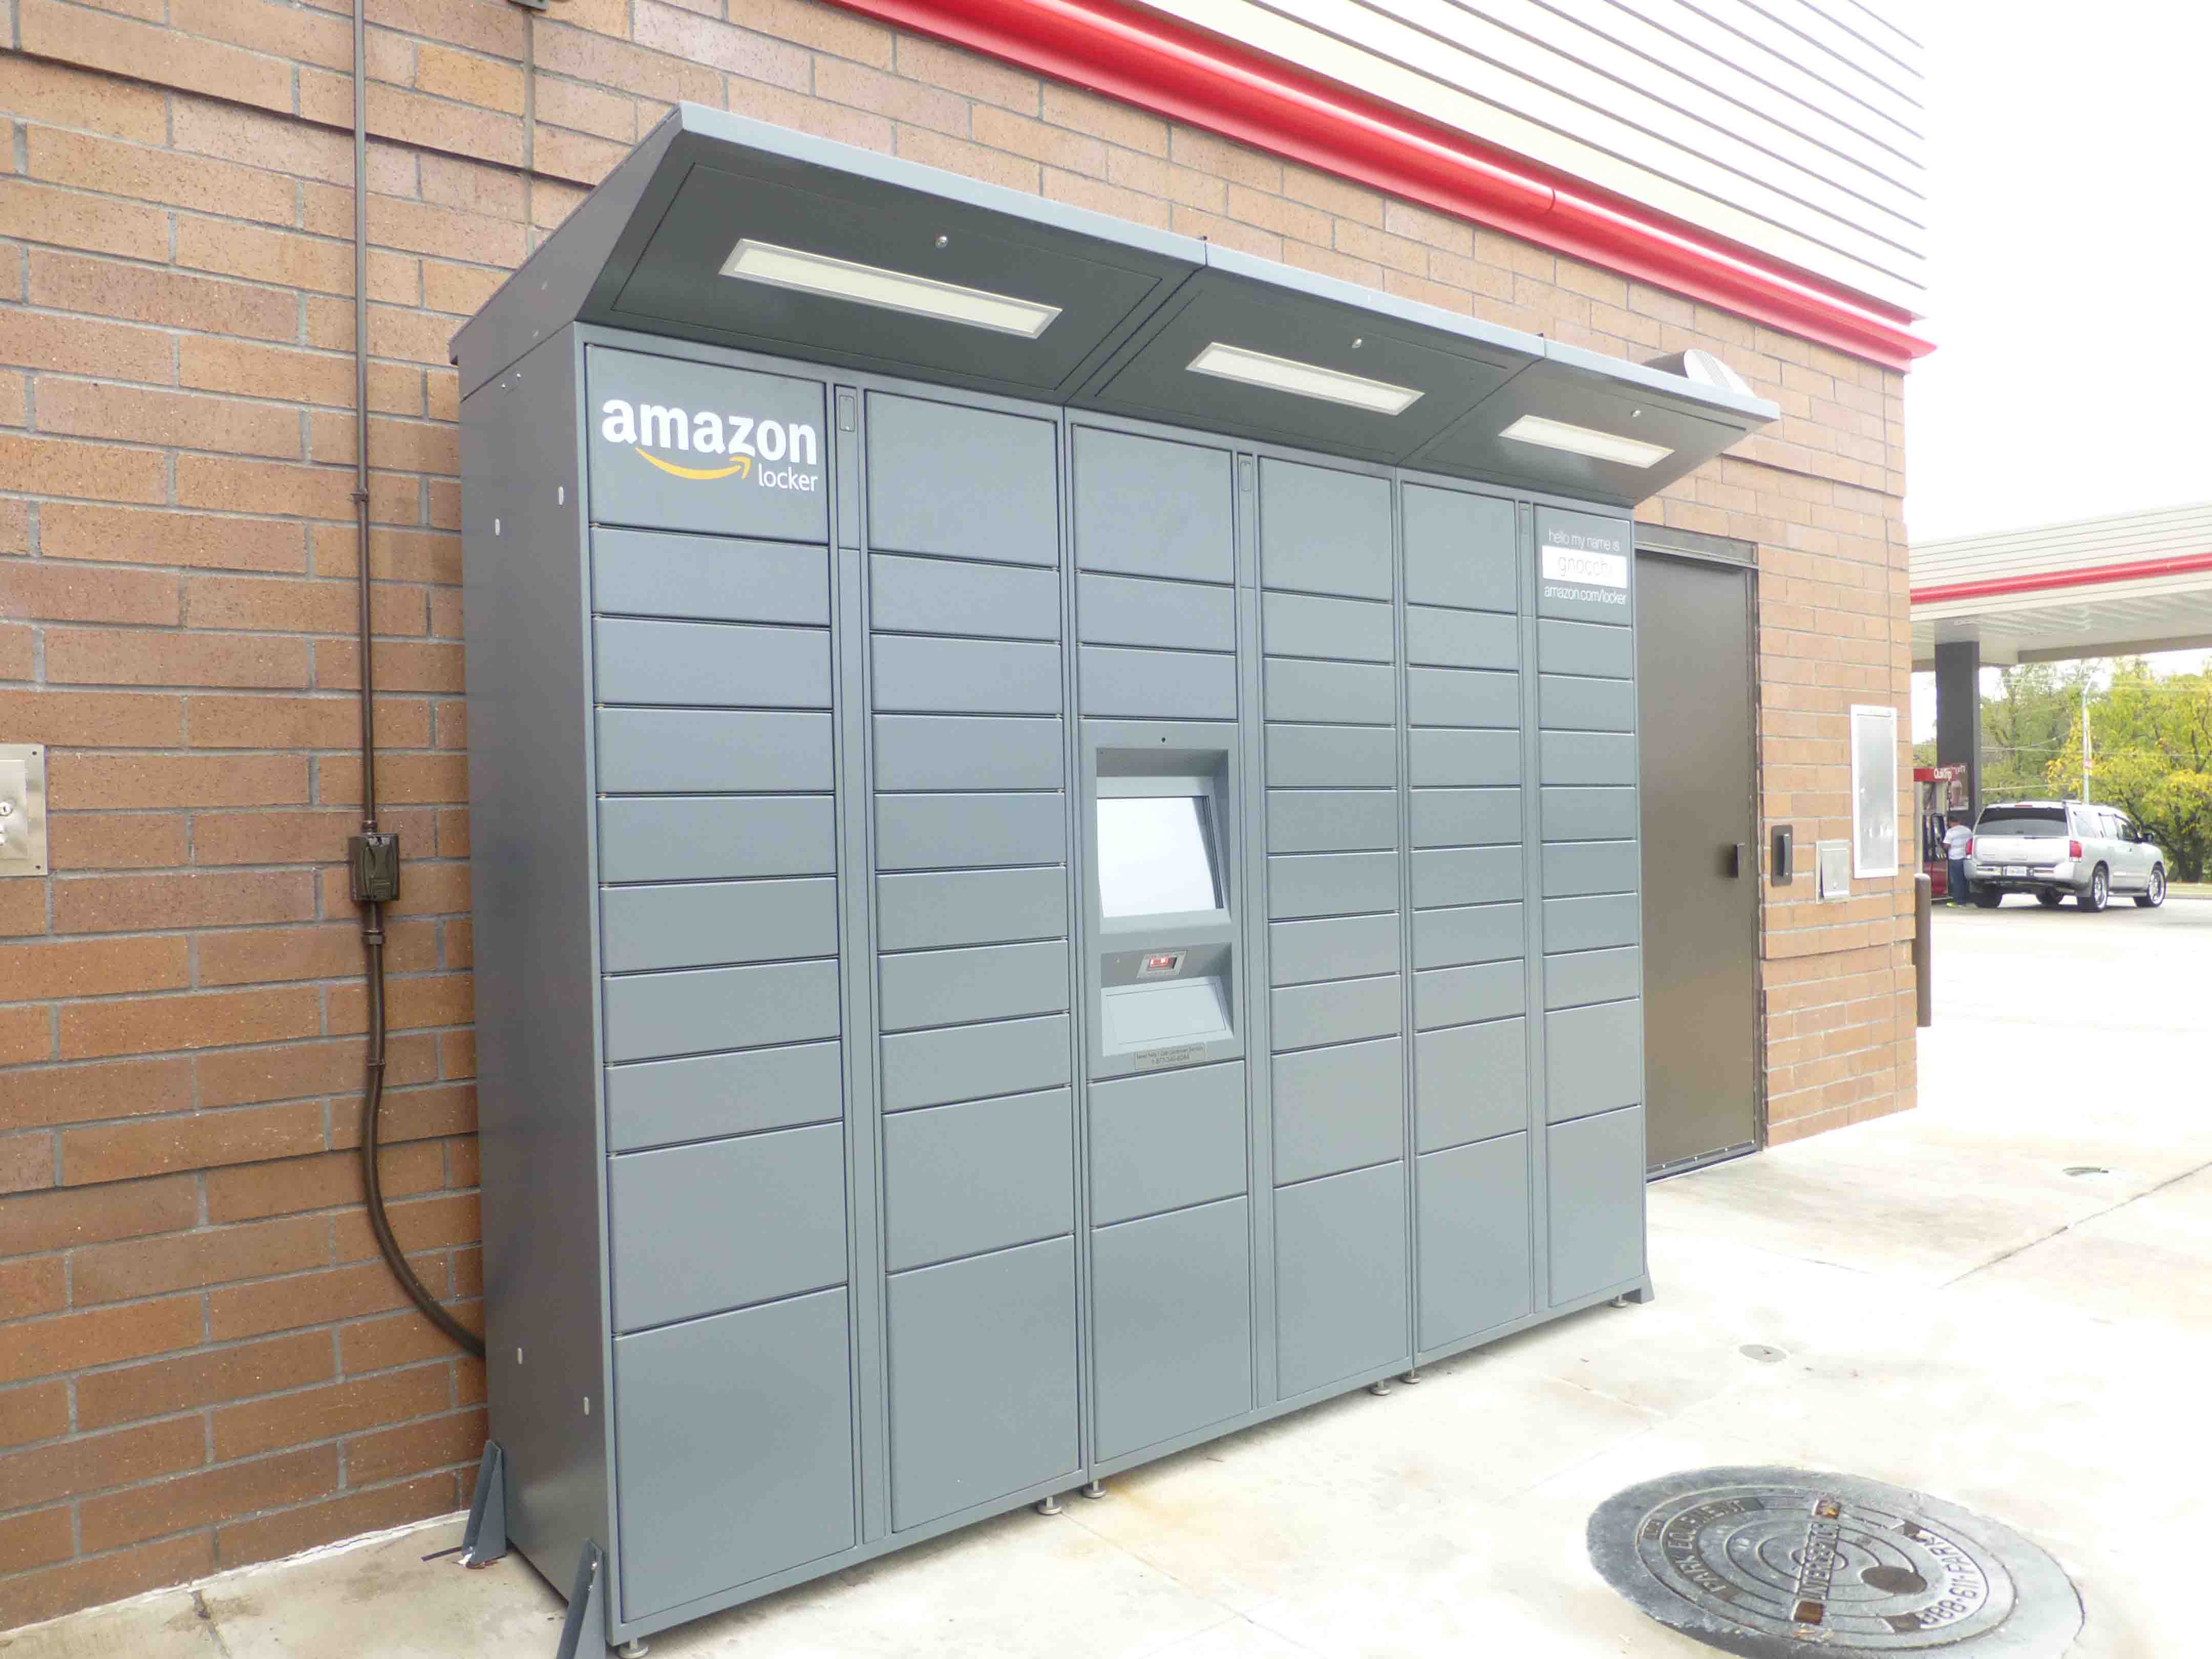 Amazon Lockers have been installed at Quik Trip, 6060 Skillman Road